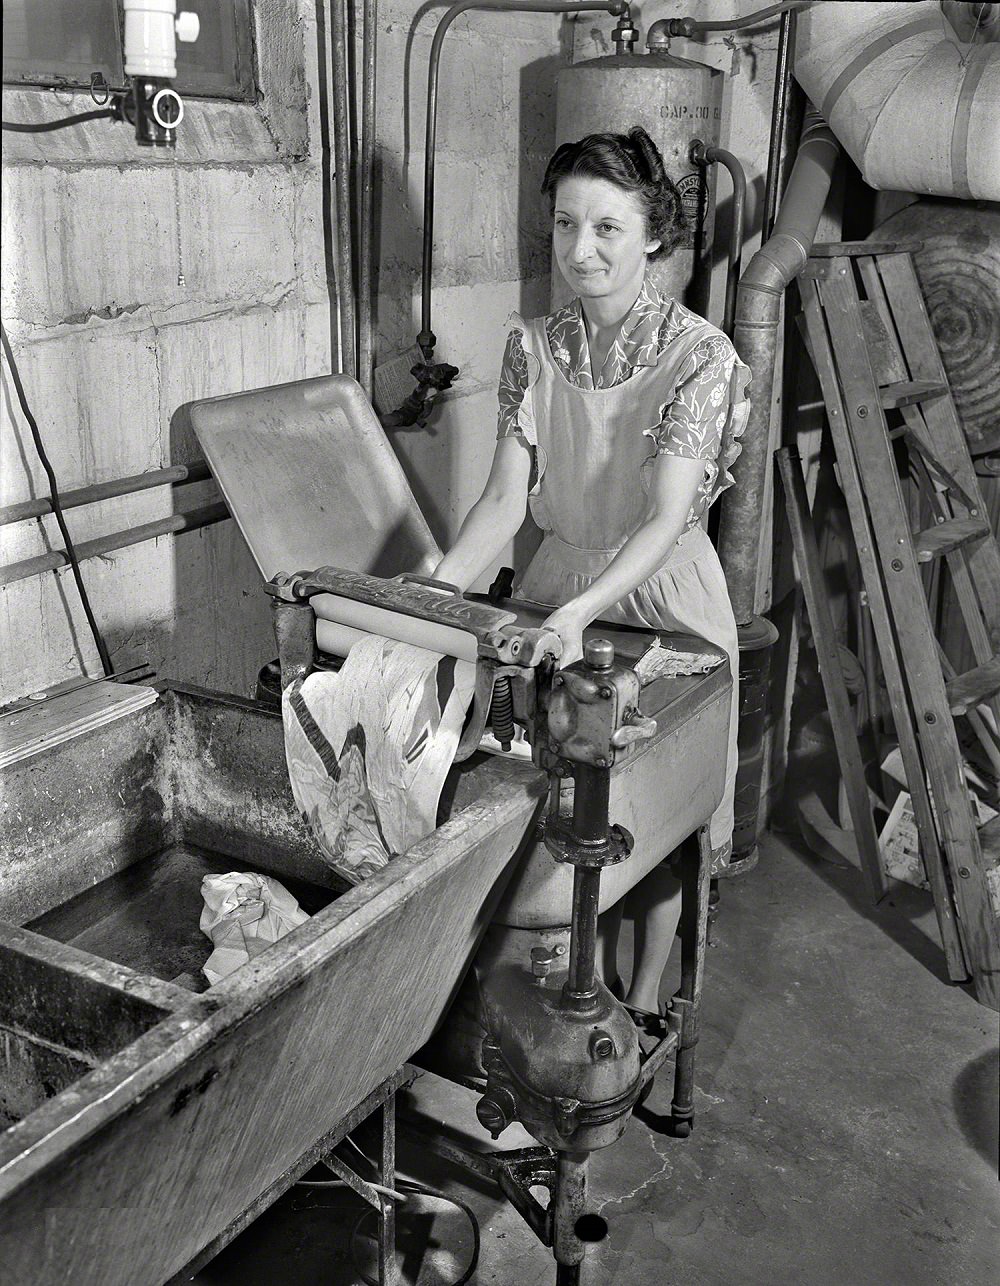 Mrs. Babcock doing the family laundry with an electric washing machine and a wringer, New York, September 1942